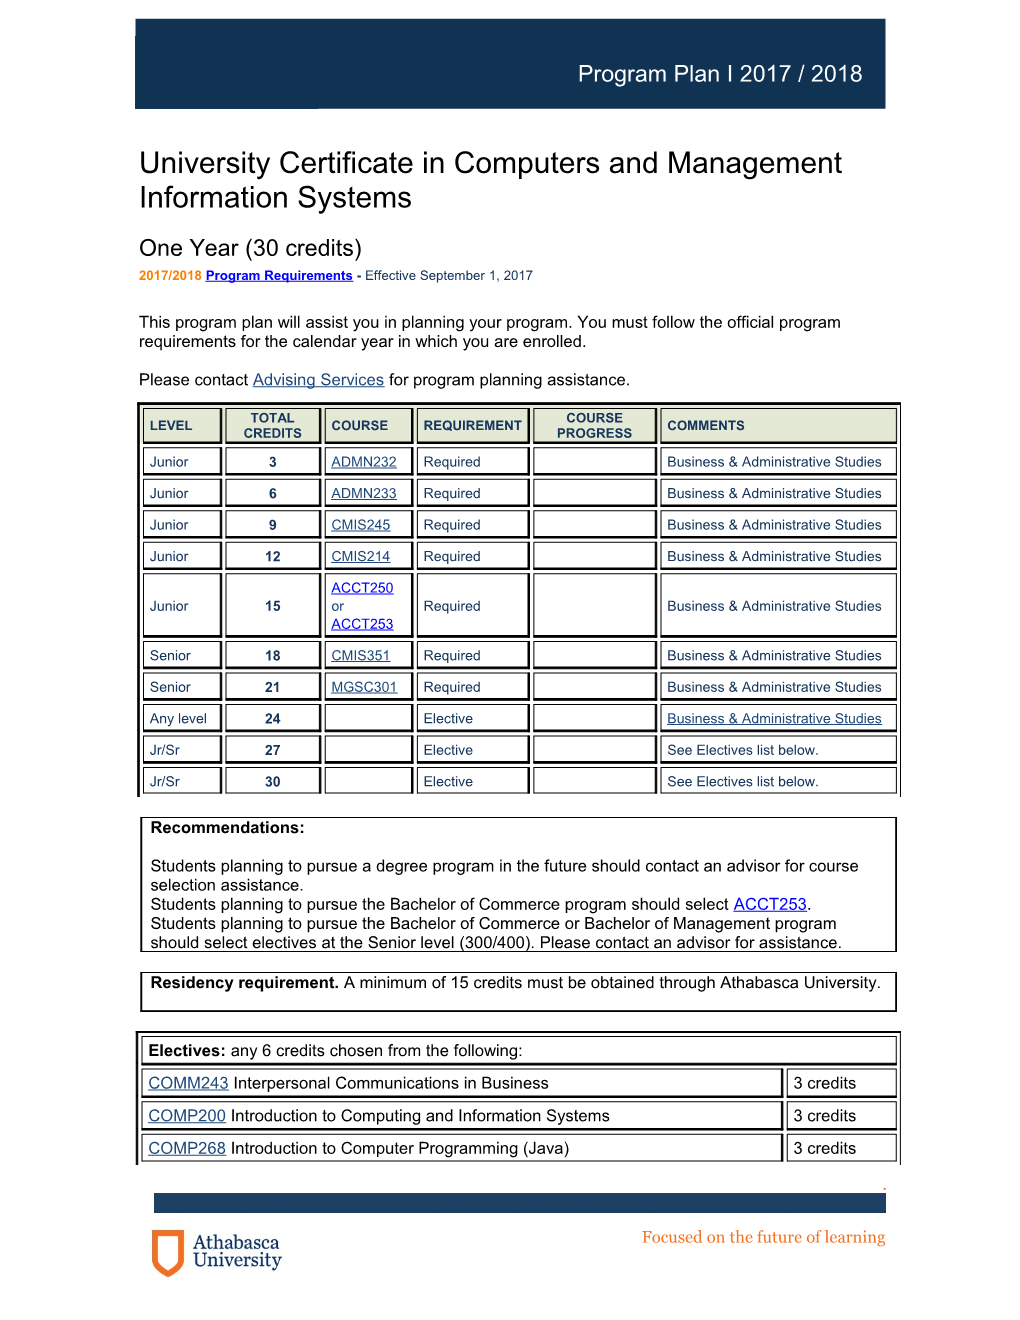 University Certificate in Computers and Management Information Systems